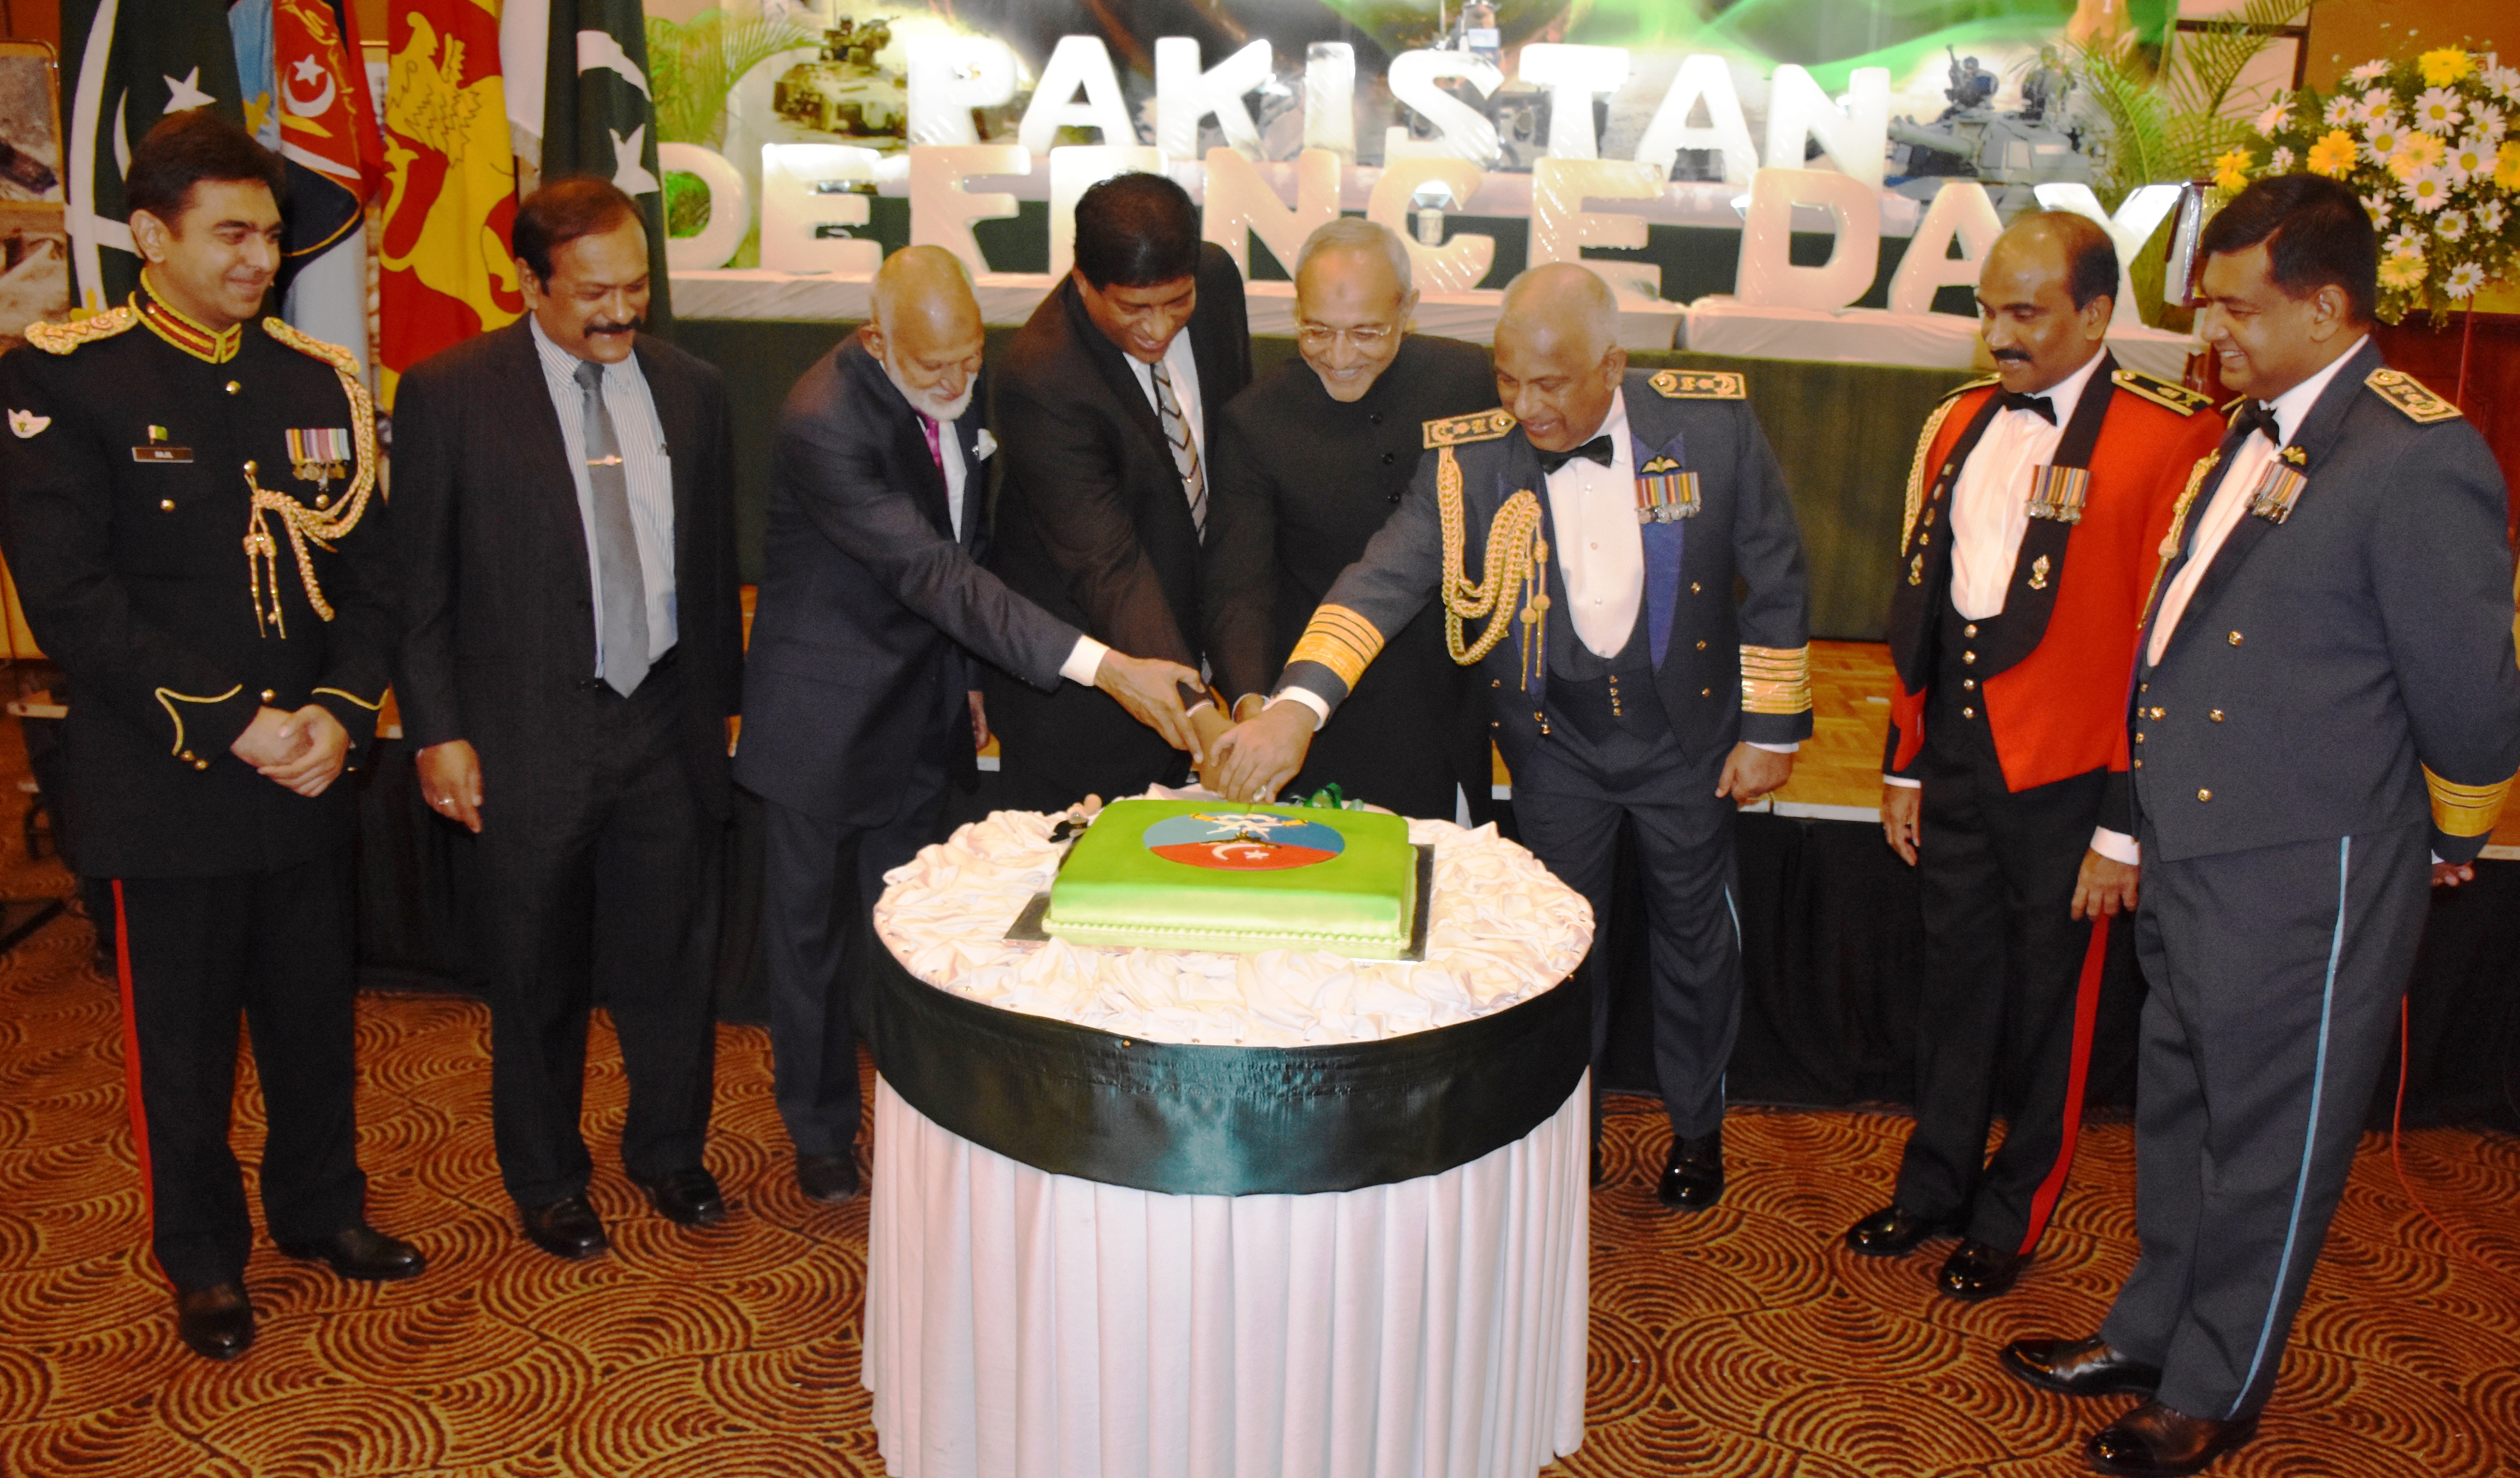 50th Defense Day of Pakistan Celebrated in Colombo